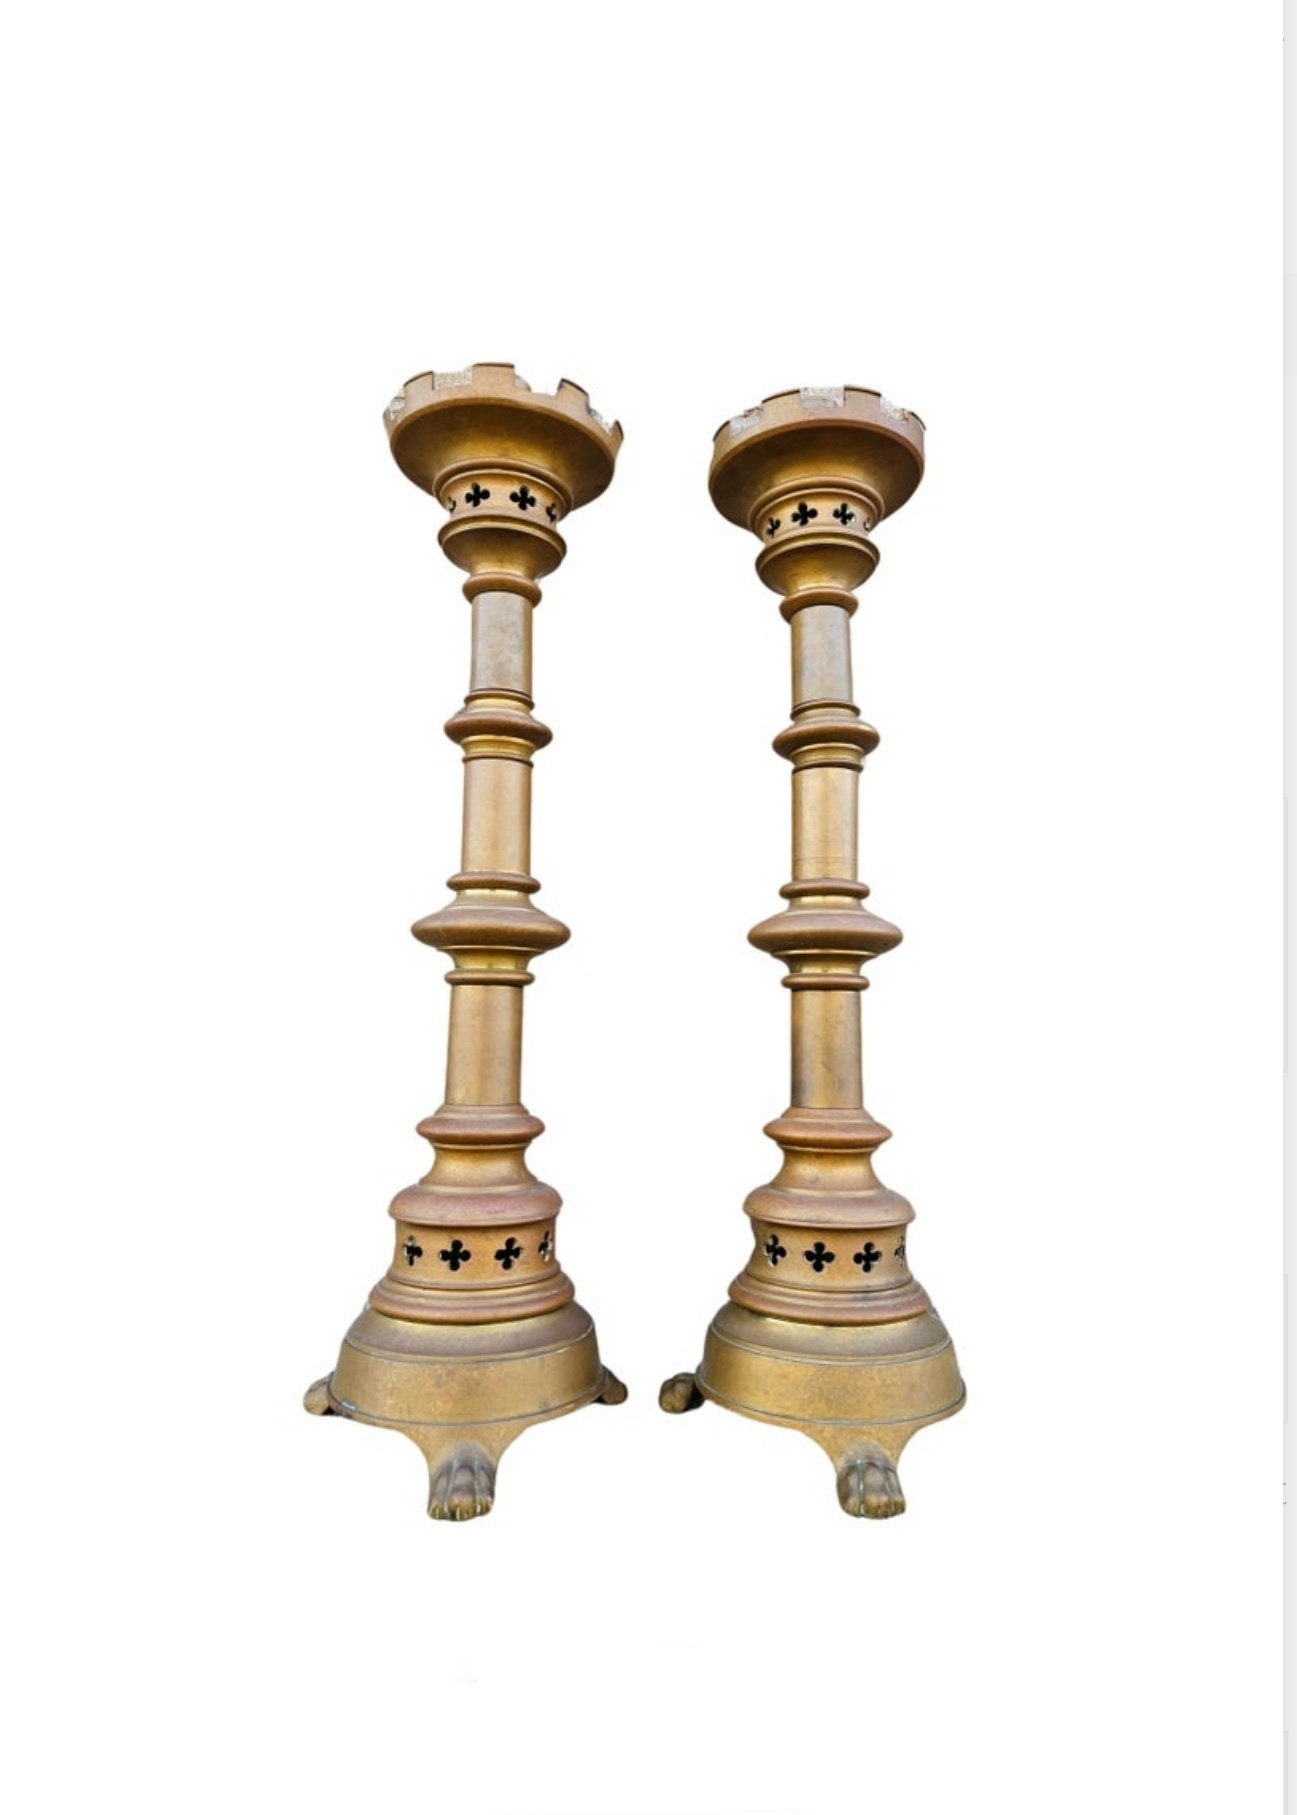 Antique Pair of Brass Ecclesiastical Gothic Claw Footed Pricket Candle  Holders (SOLD) - Antique Church Furnishings